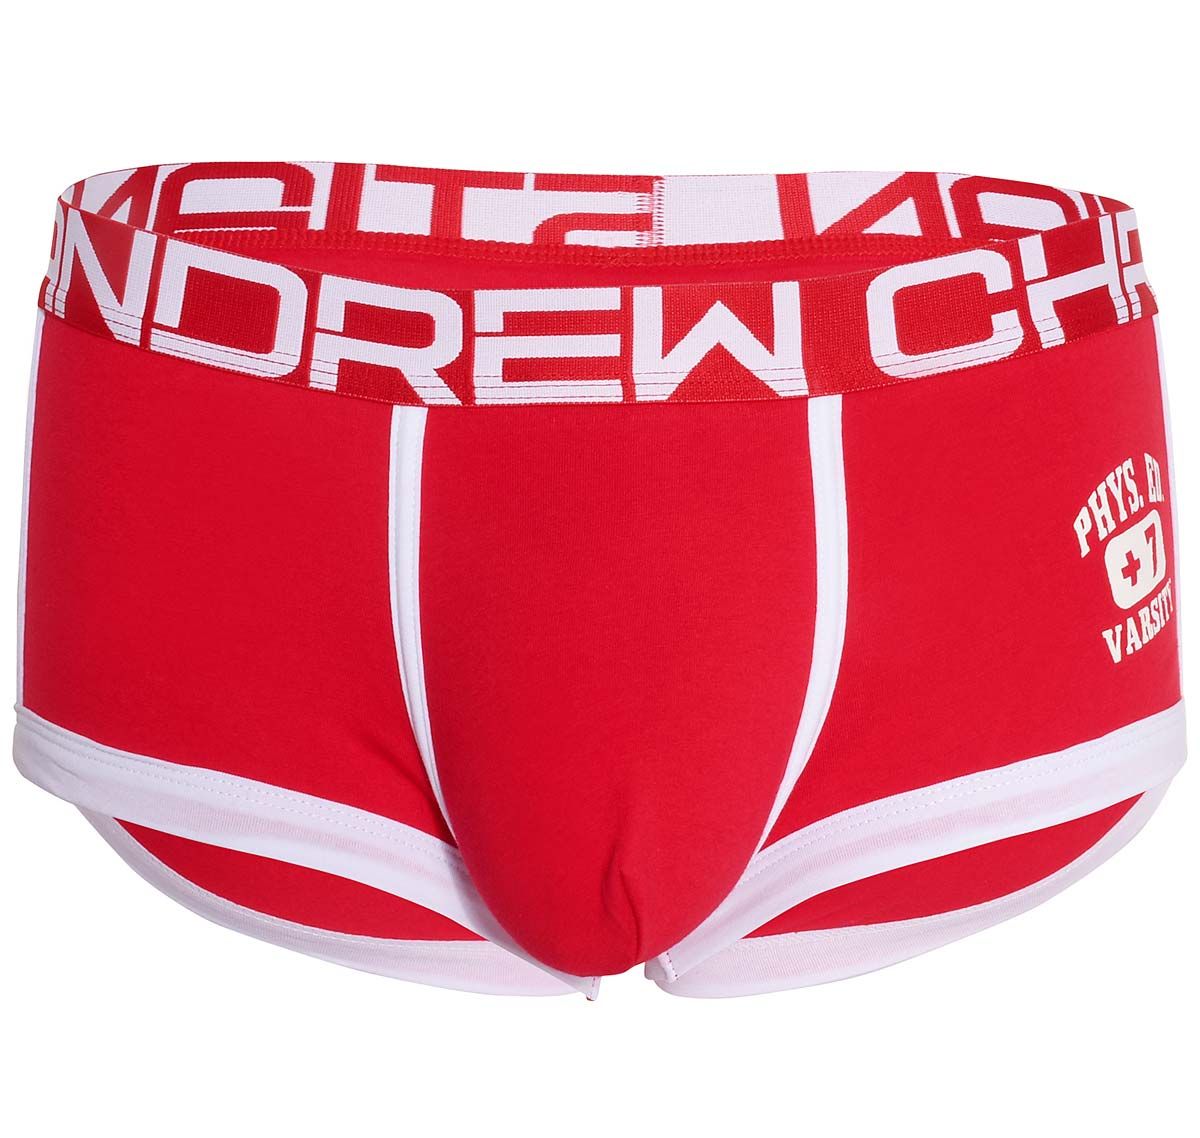 Andrew Christian Boxers PHYS. ED. VARSITY BOXER w/ ALMOST NAKED 92579, red